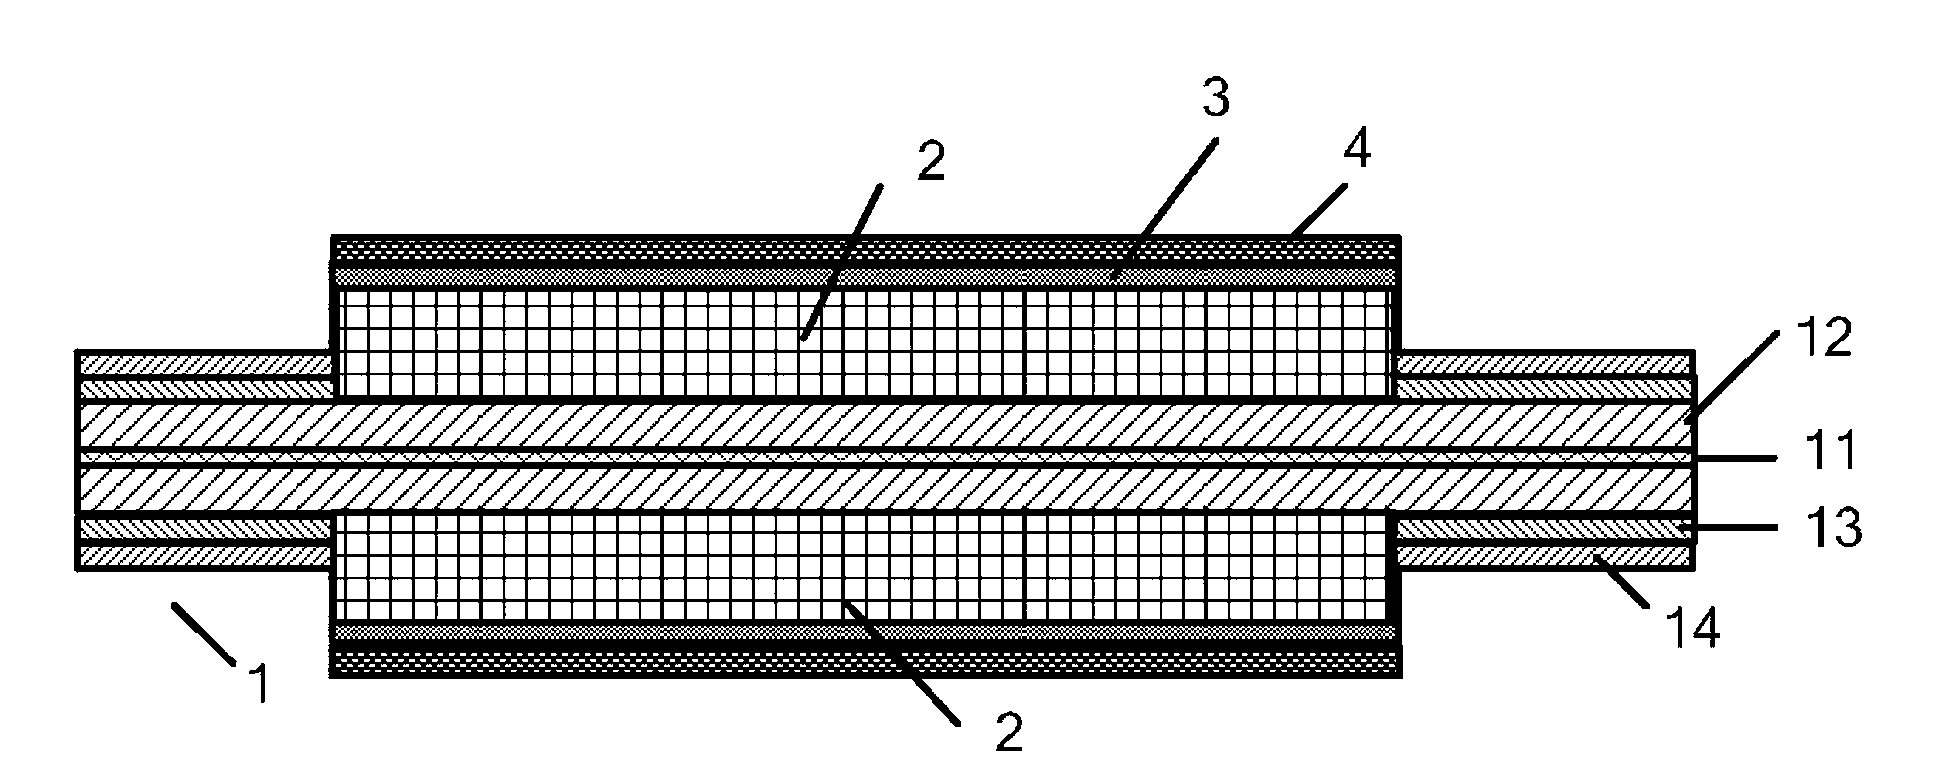 Device used for fiber laser and capable of filtering out cladding light